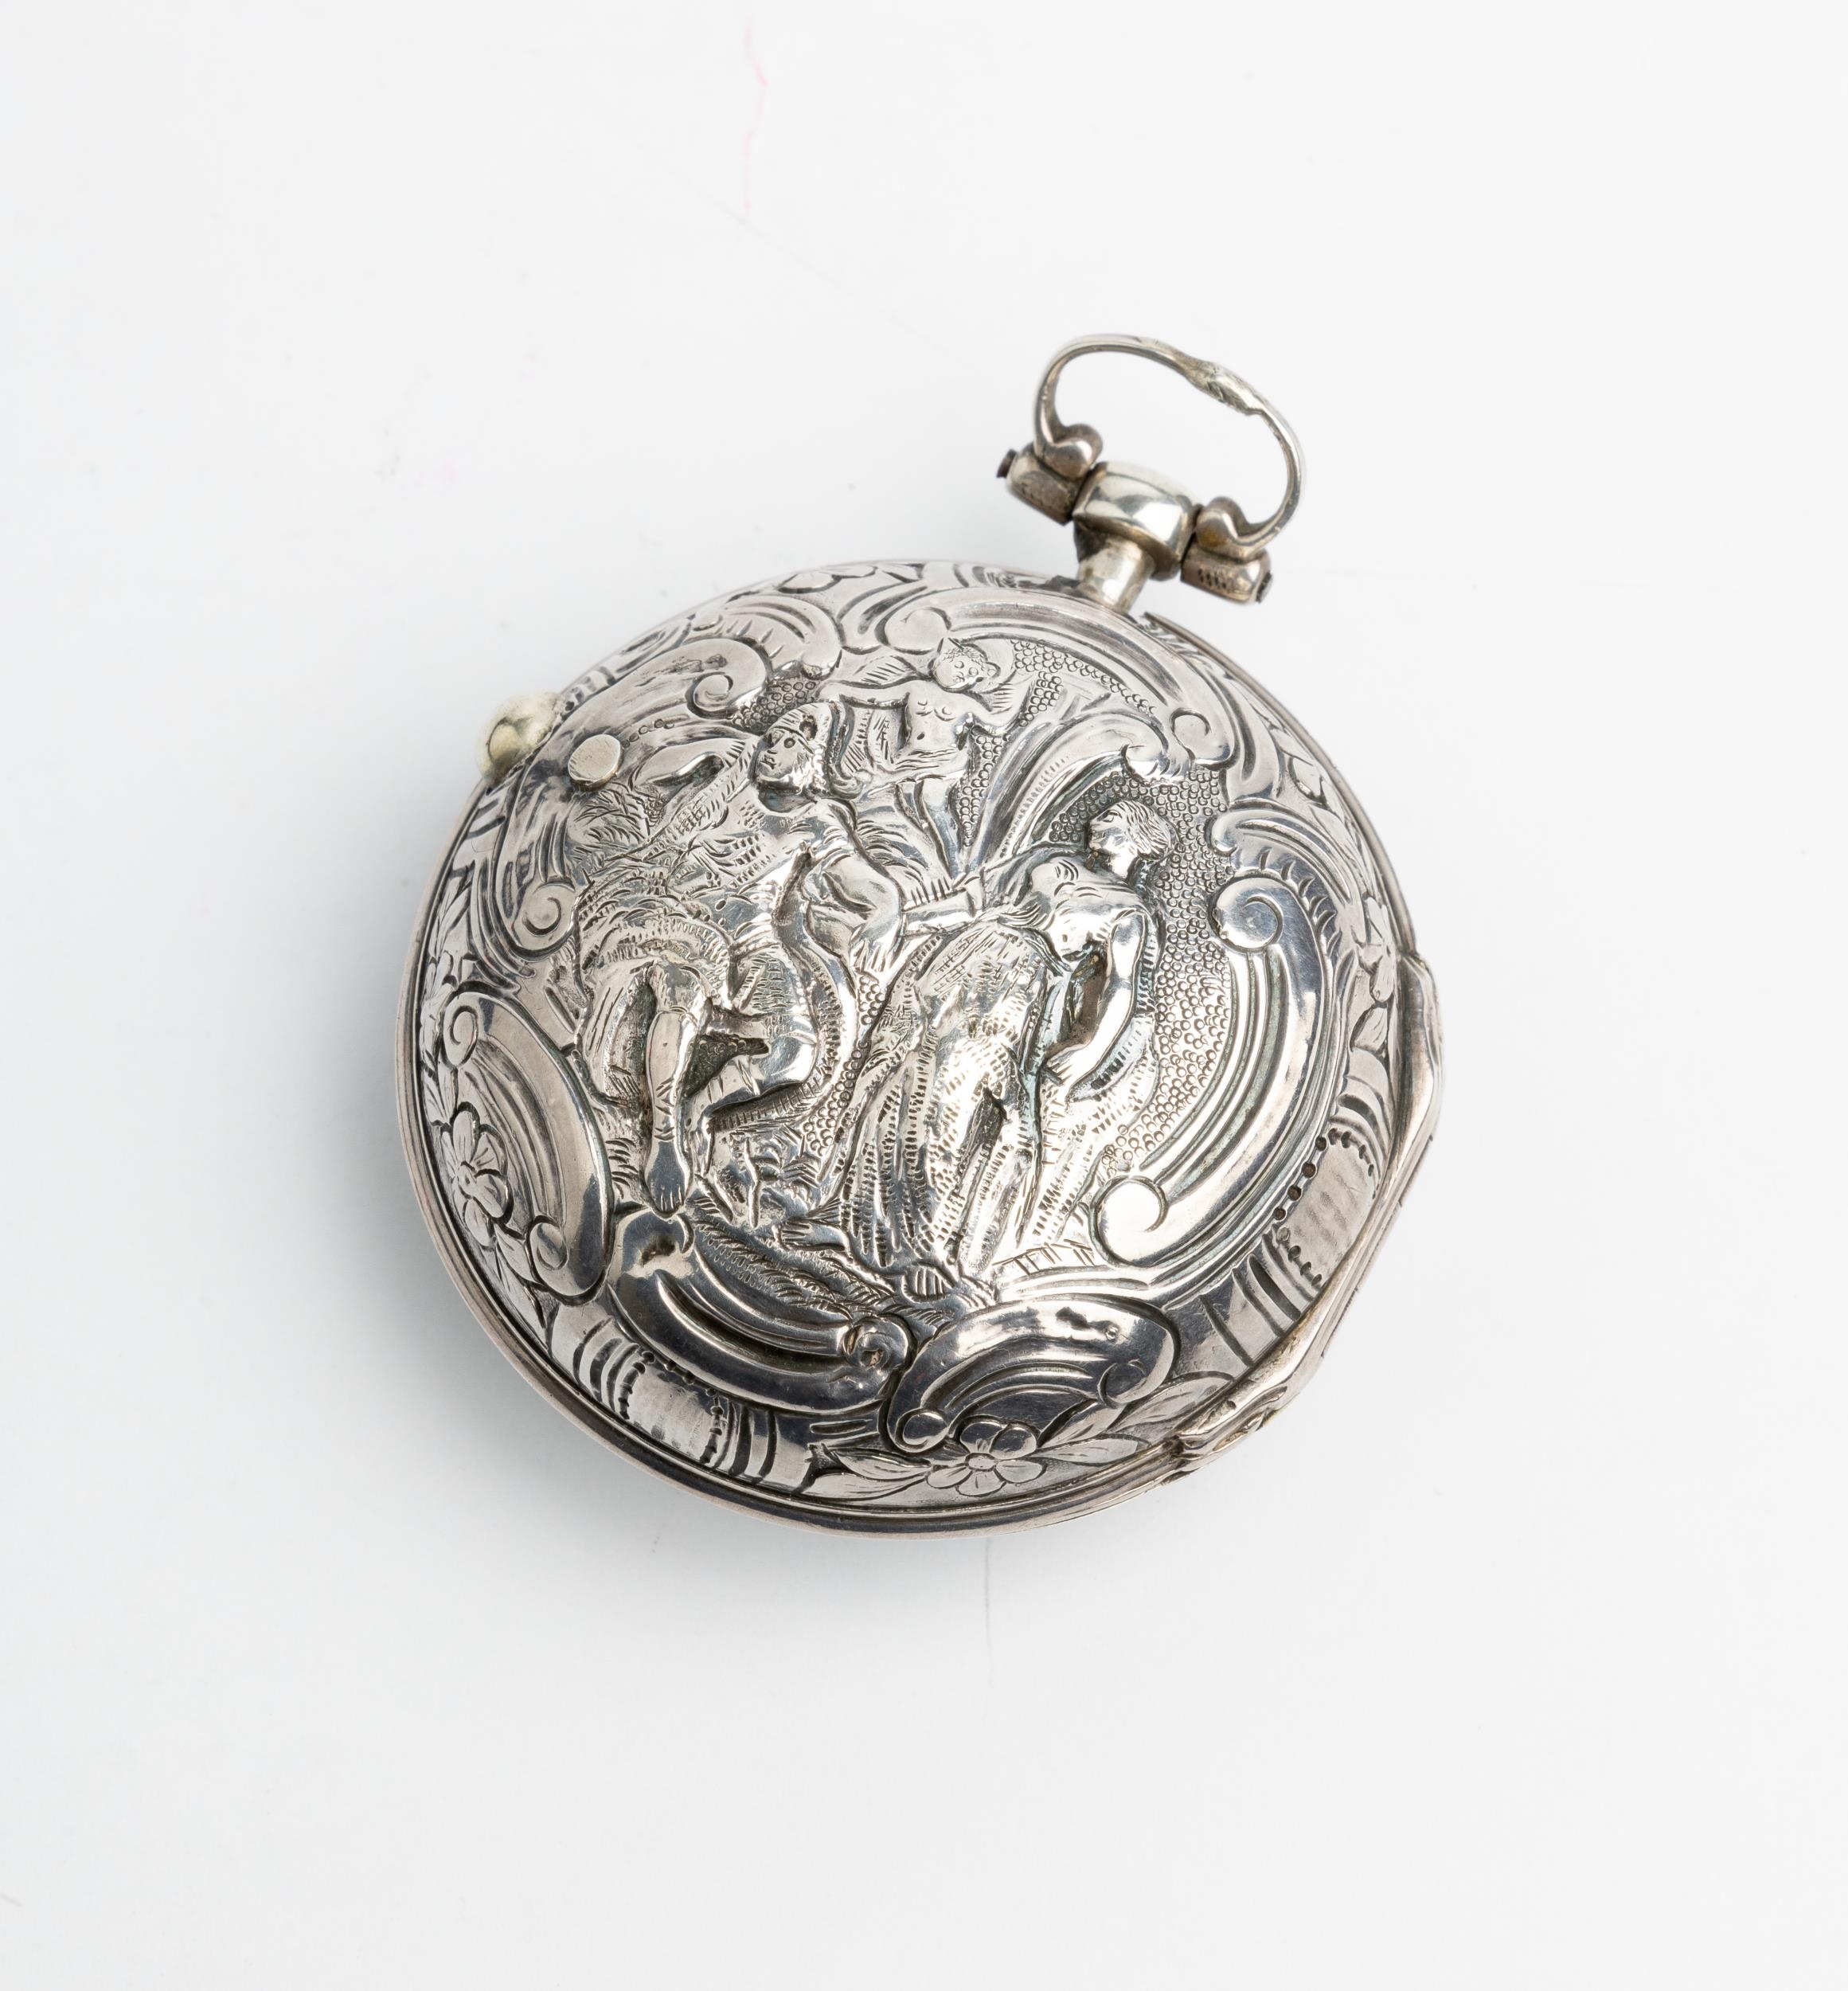 A SILVER REPOUSSE PAIR CASED VERGE WATCH. Signed Stoakes, London, No 29291, square baluster pillars, - Image 2 of 2